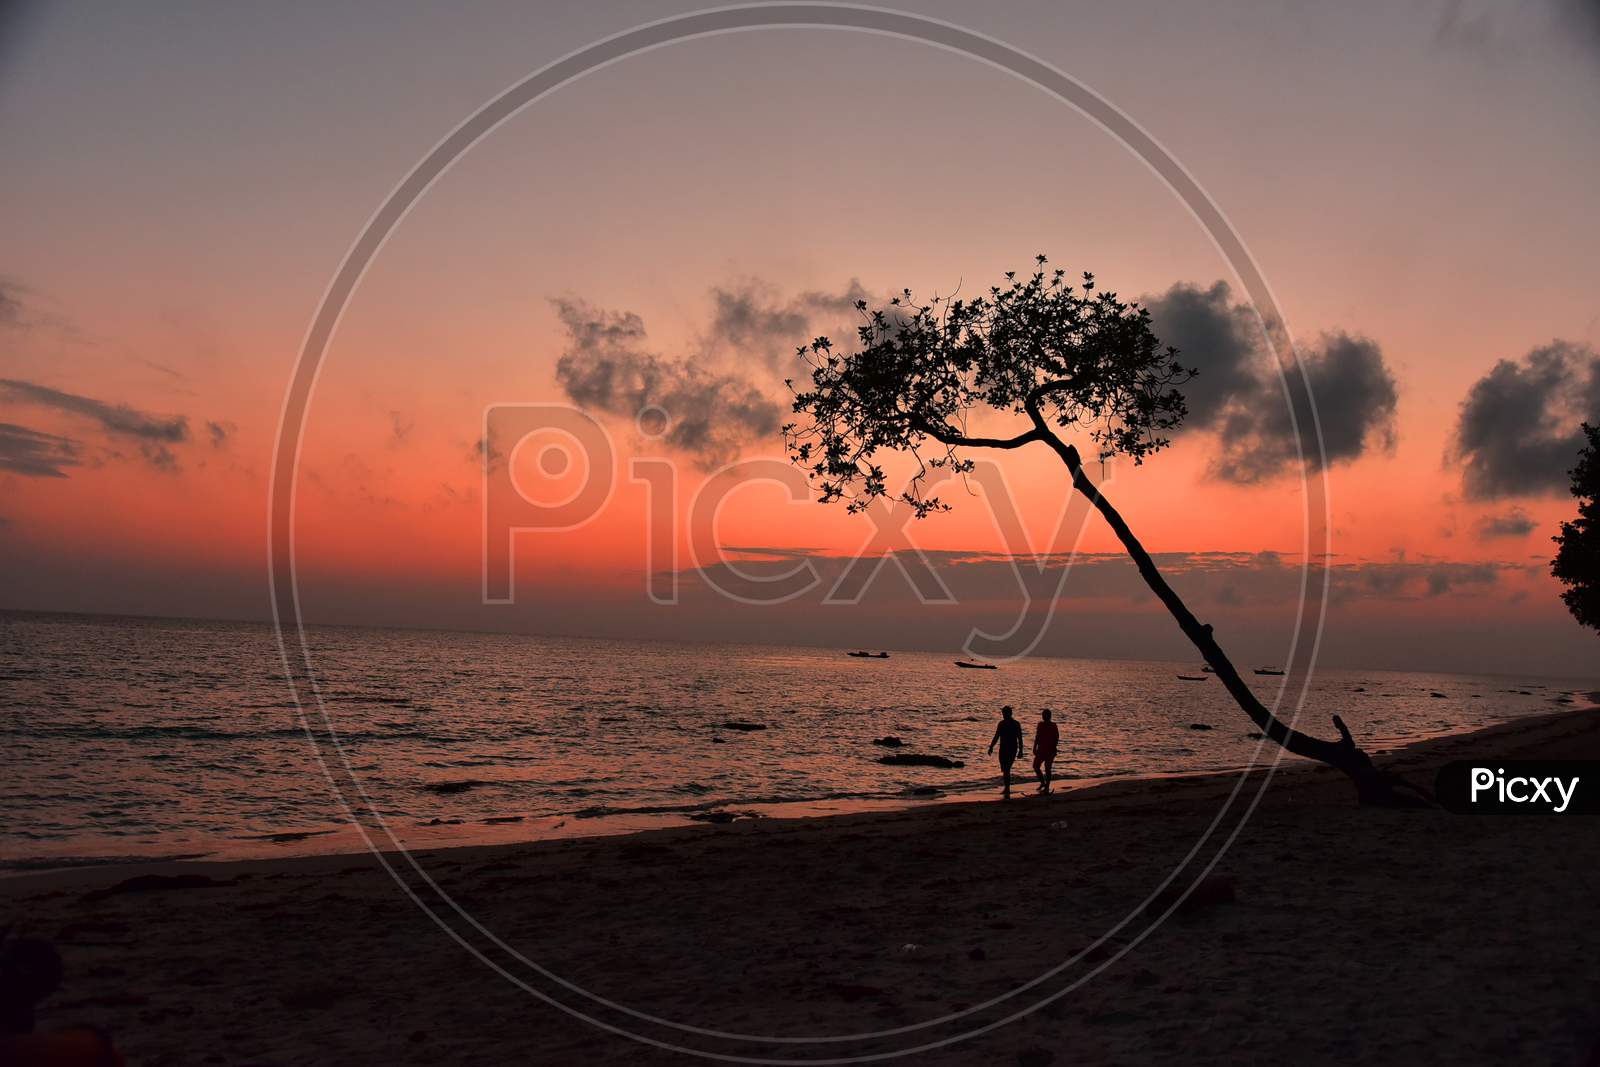 Silhouette Of Tree Over an Sunset Sky in a beach